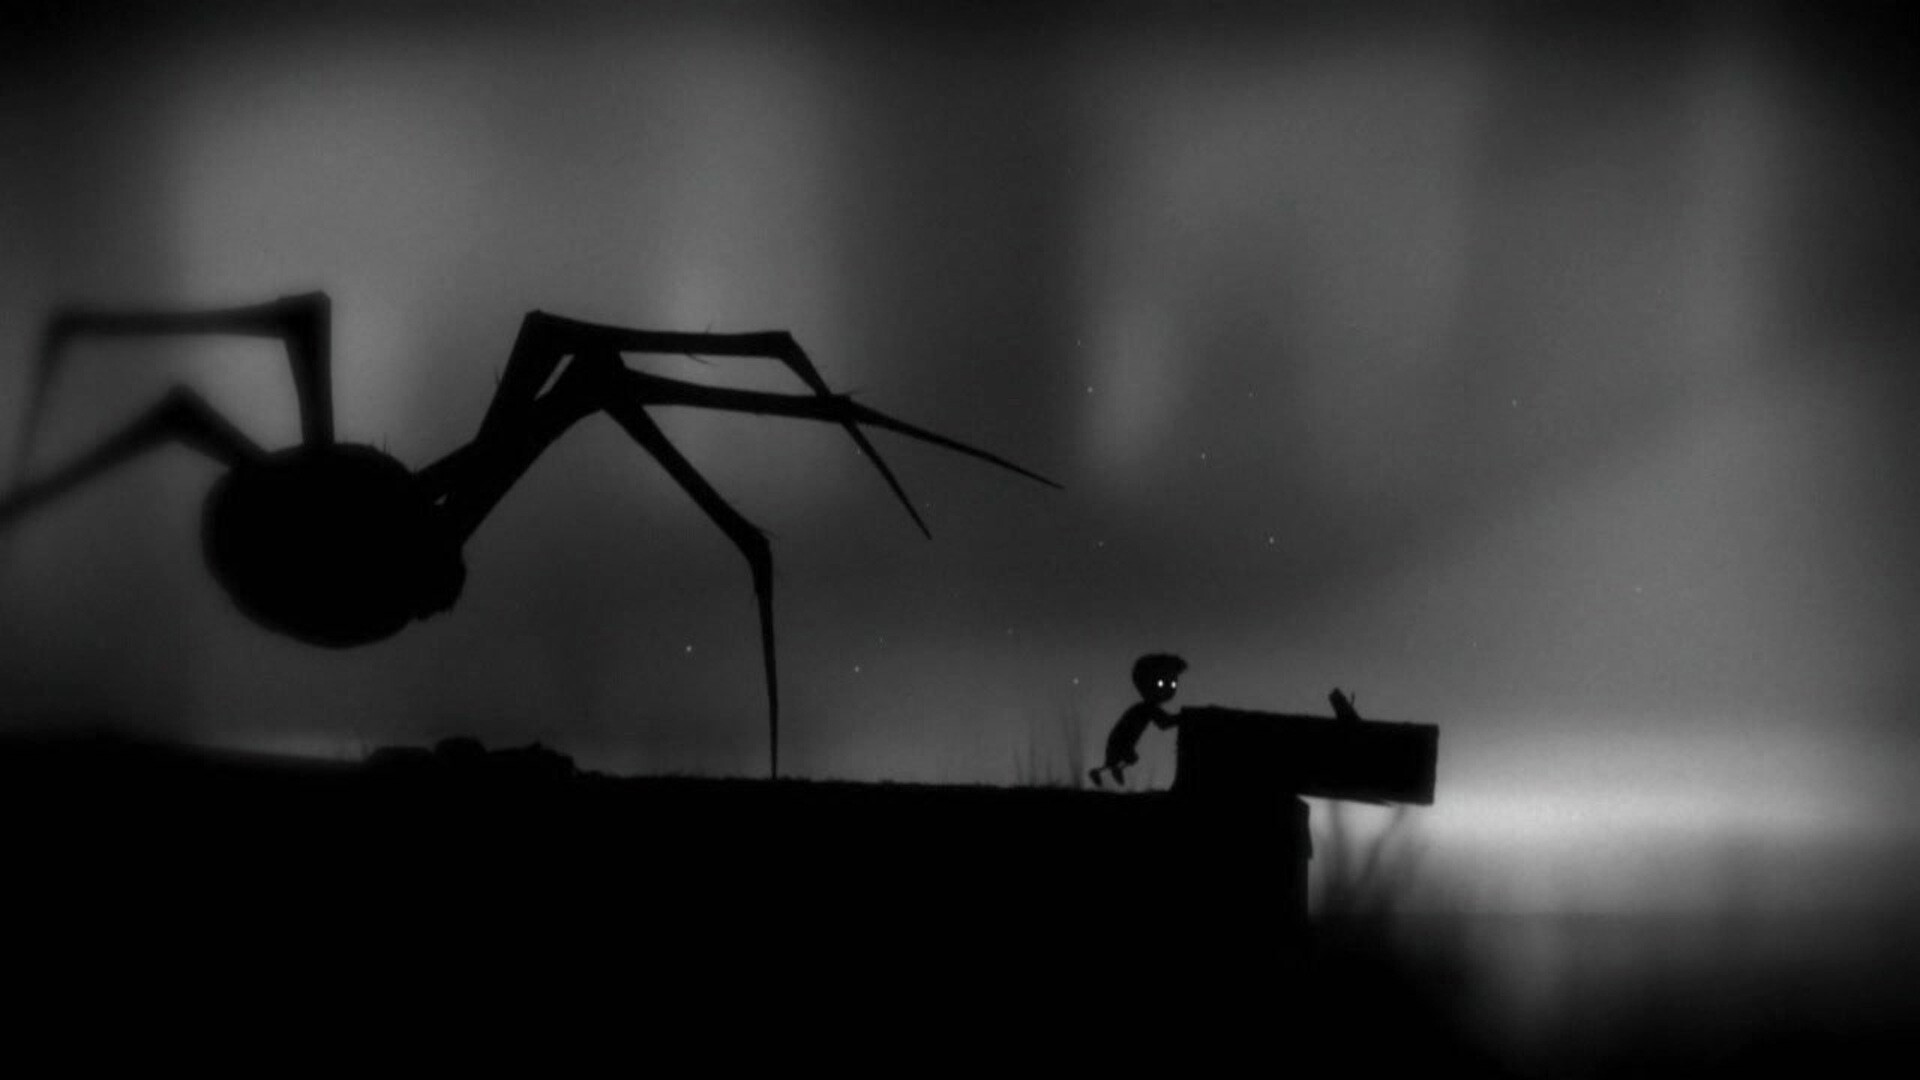 Limbo: Before its release, the game was awarded both the "Technical Excellence" and "Excellence in Visual Art" titles at the Independent Games Festival during the 2010 Game Developers Conference. 1920x1080 Full HD Wallpaper.